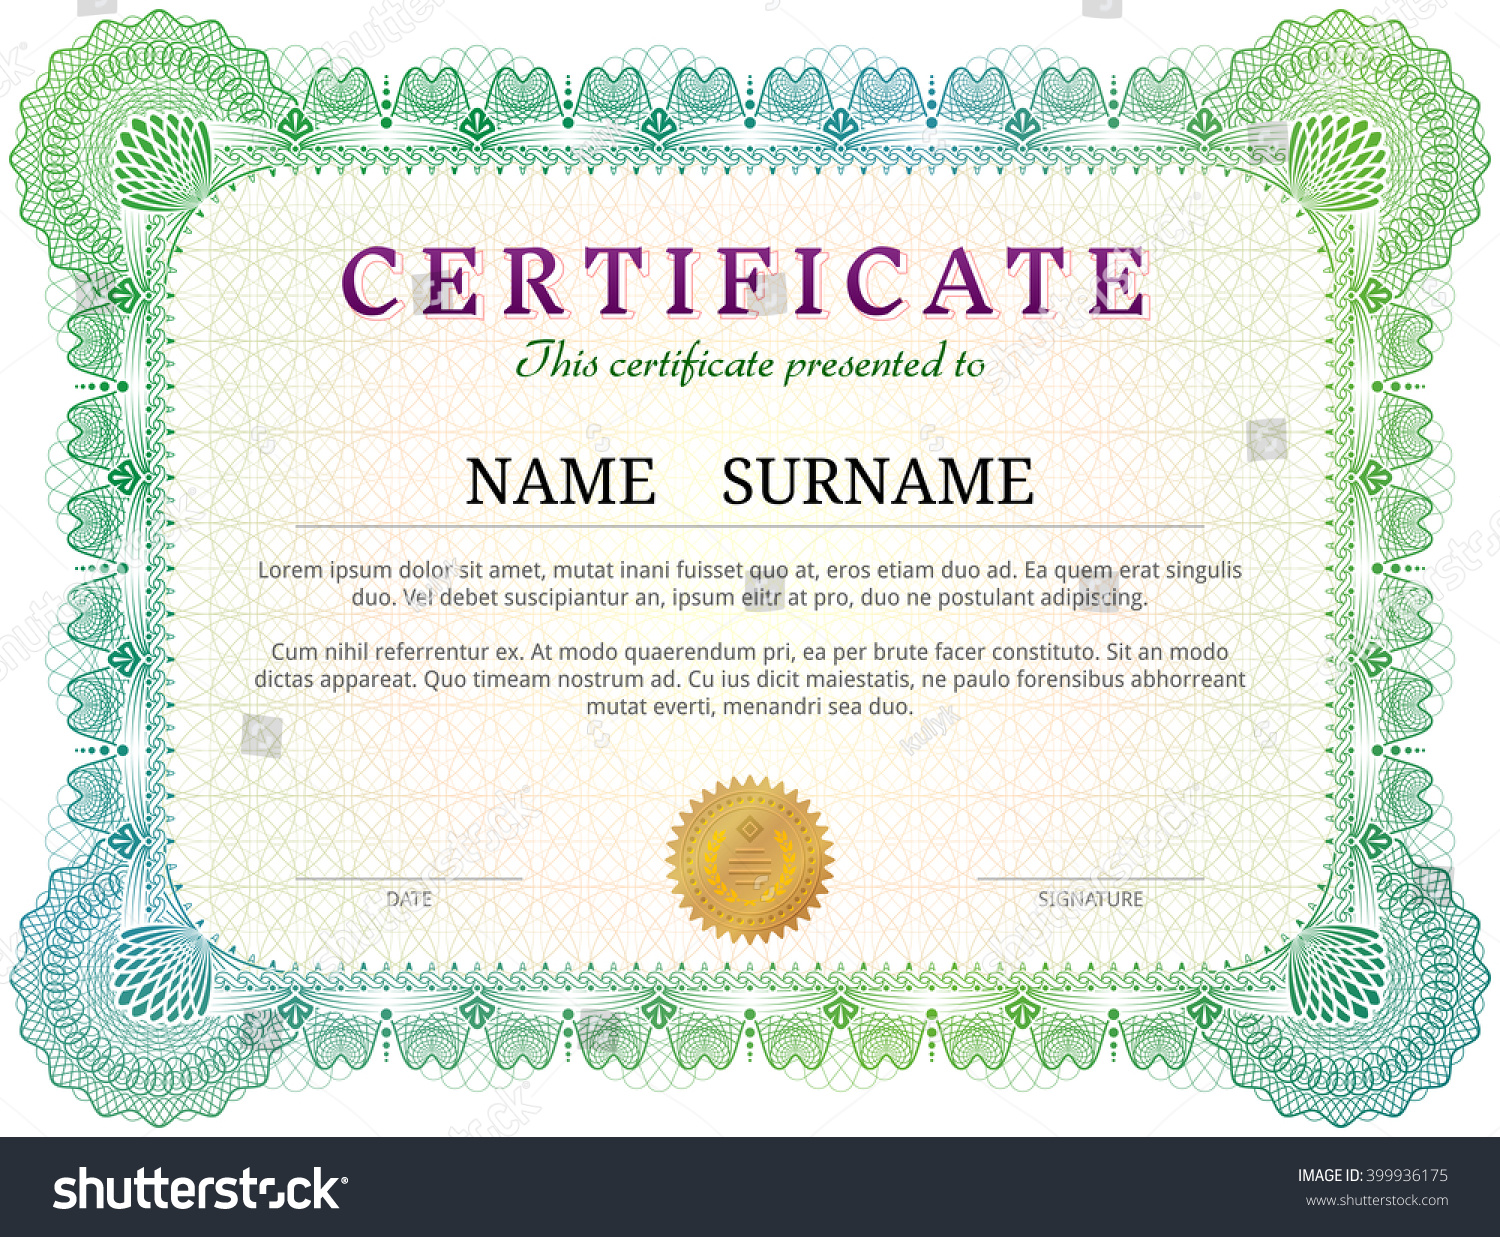 What are some ways of authenticating a stock certificate?